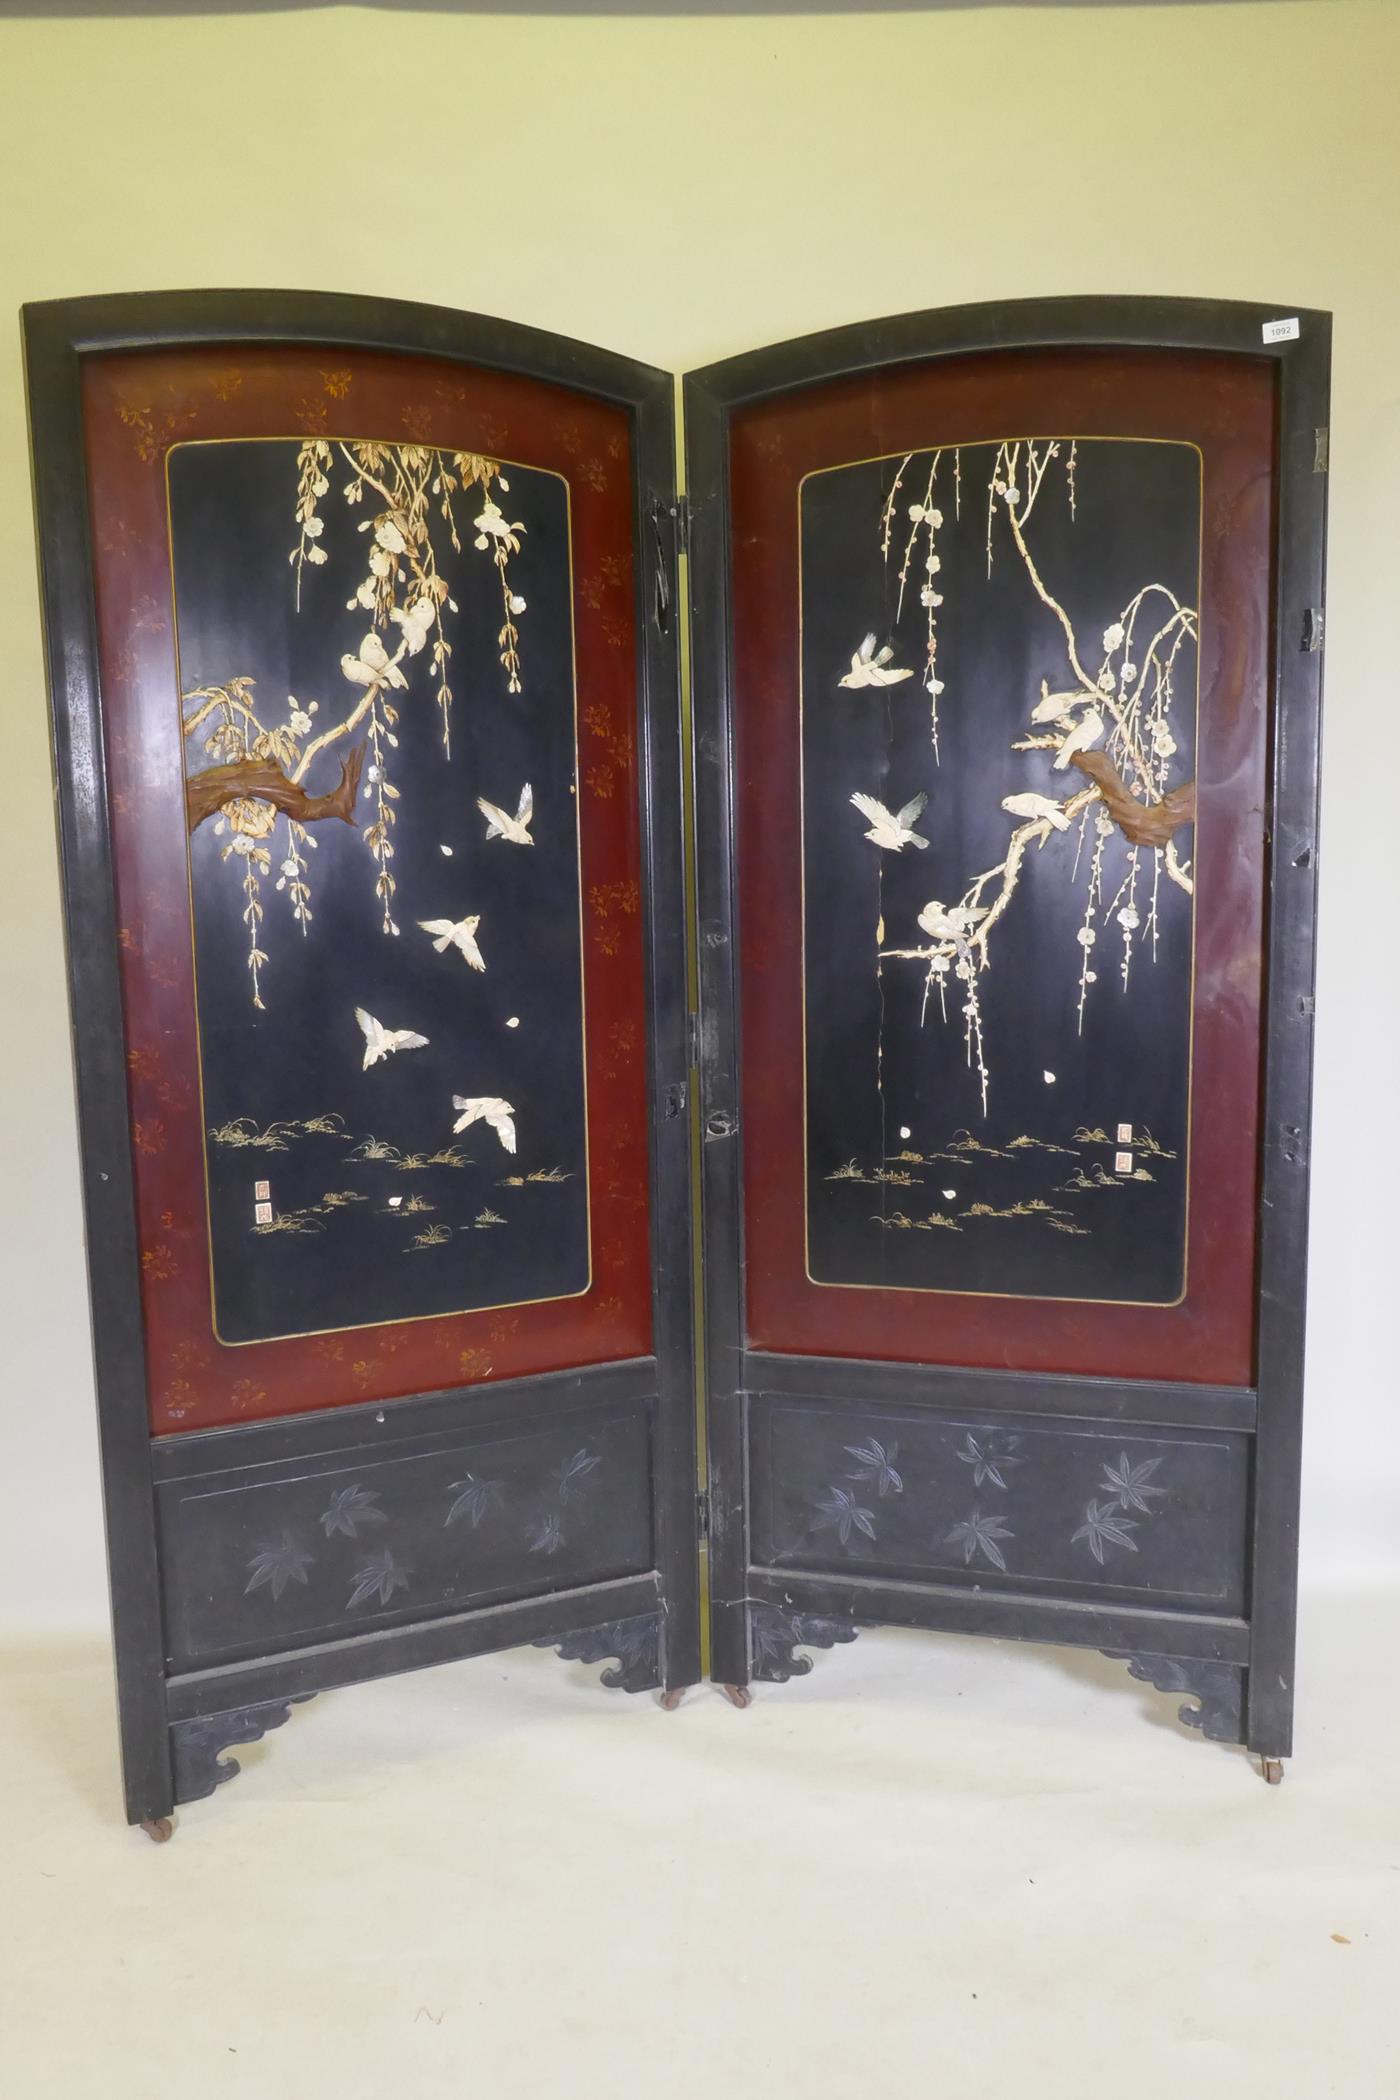 A Meiji period two fold lacquer screen, with raised decoration of birds and blossom in bone,